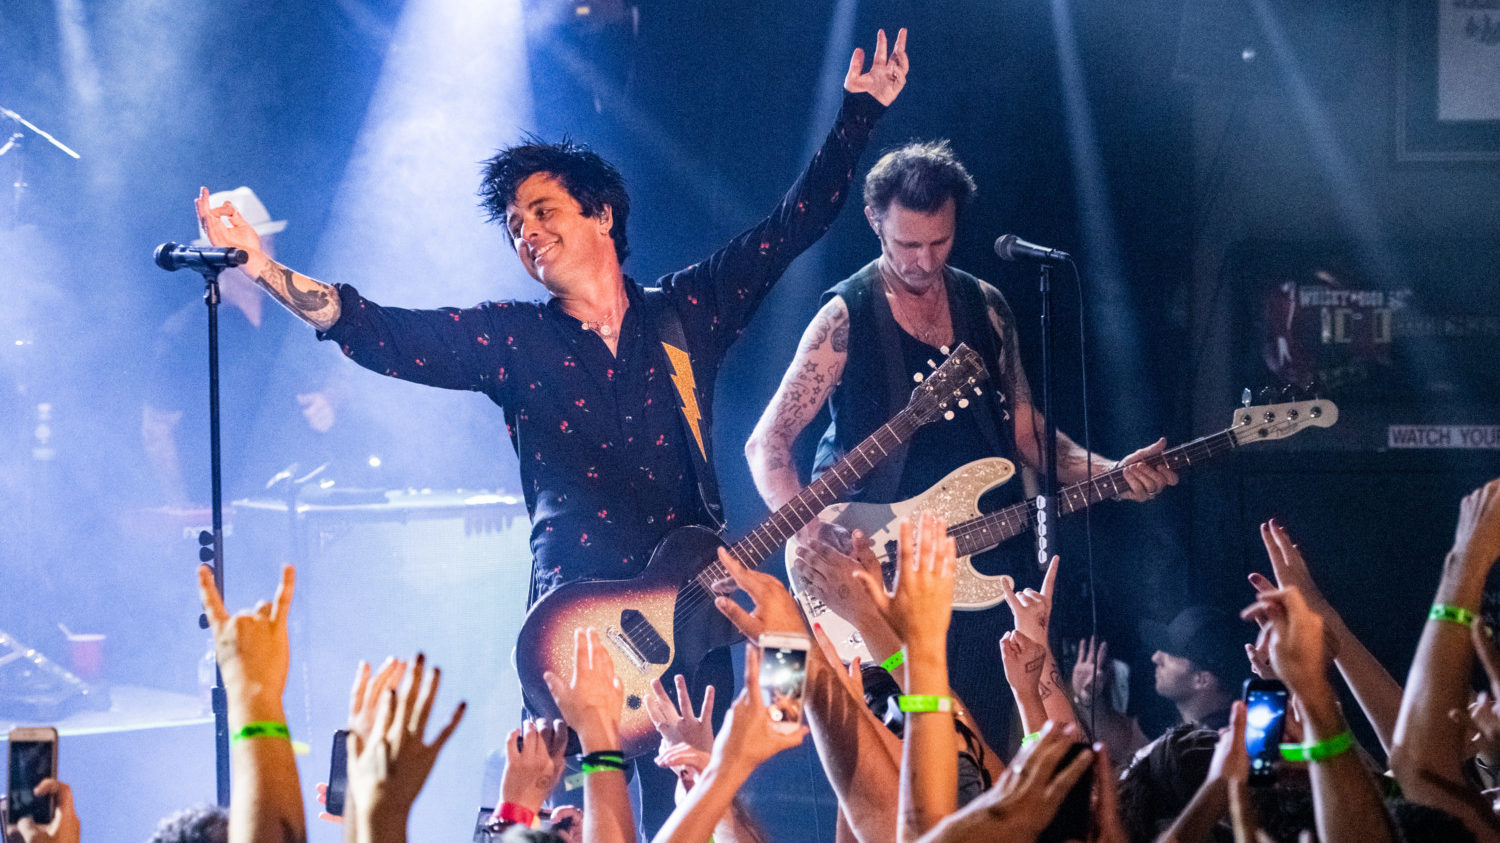 Green Day, Fall Out Boy and Weezer Celebrate “Hella Mega Tour” Announcement With Historic Show at Whisky A Go Go